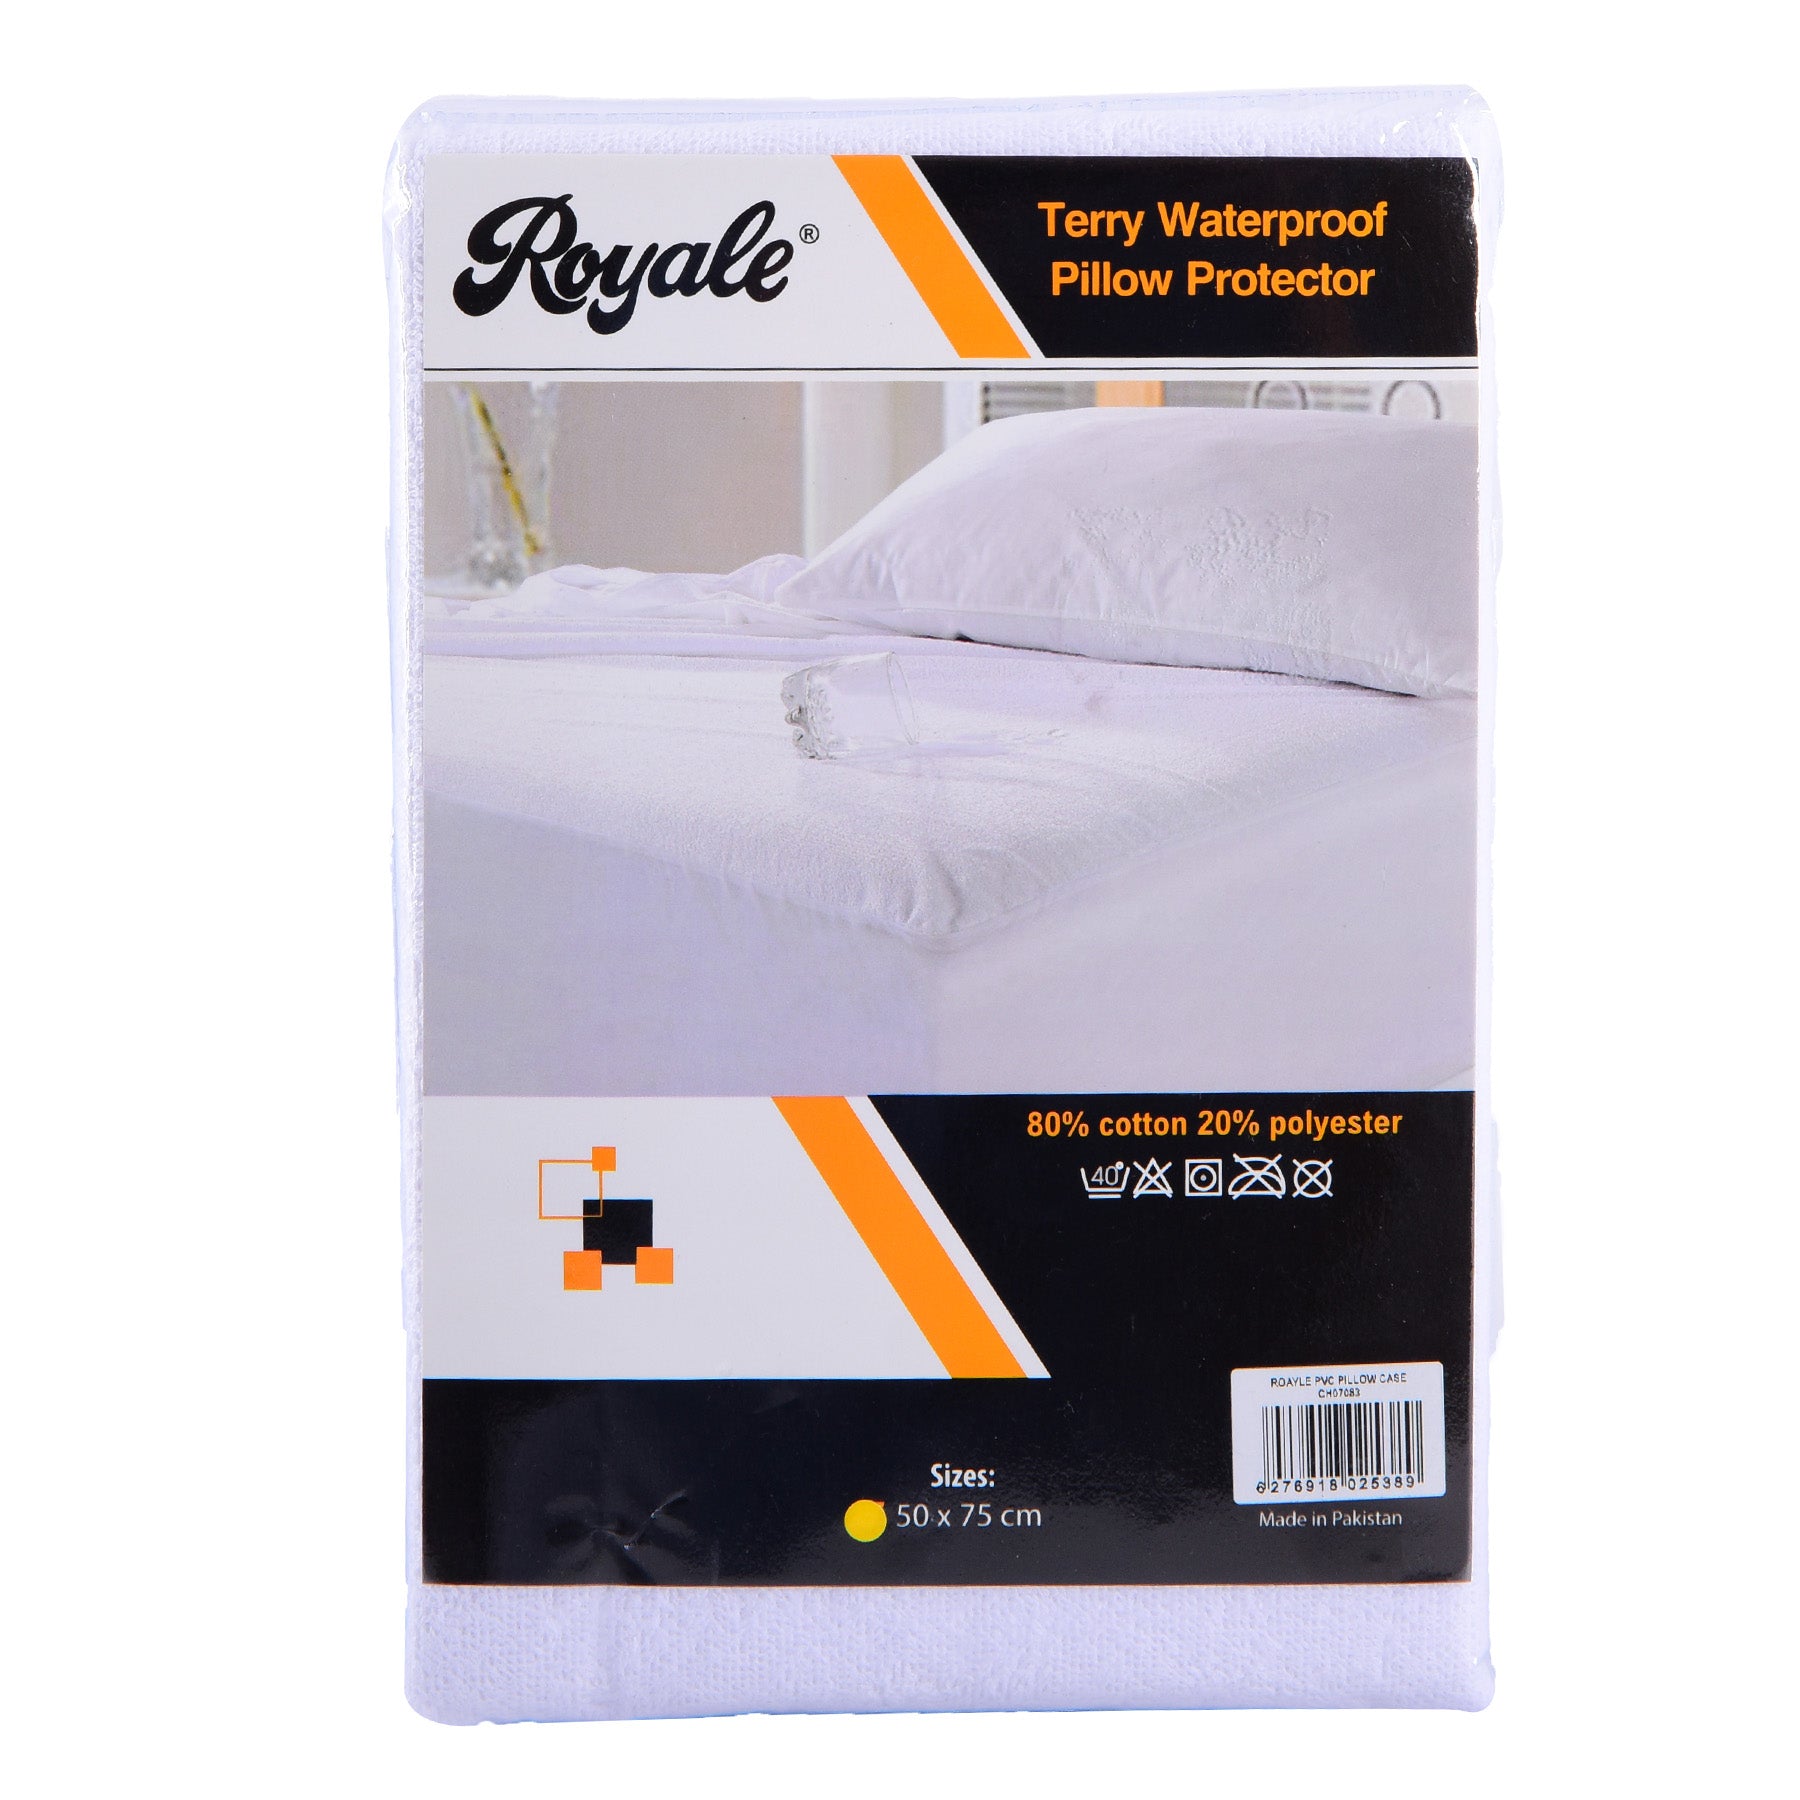 Pillow Protector Cover , White Color Size: 50x75cm.